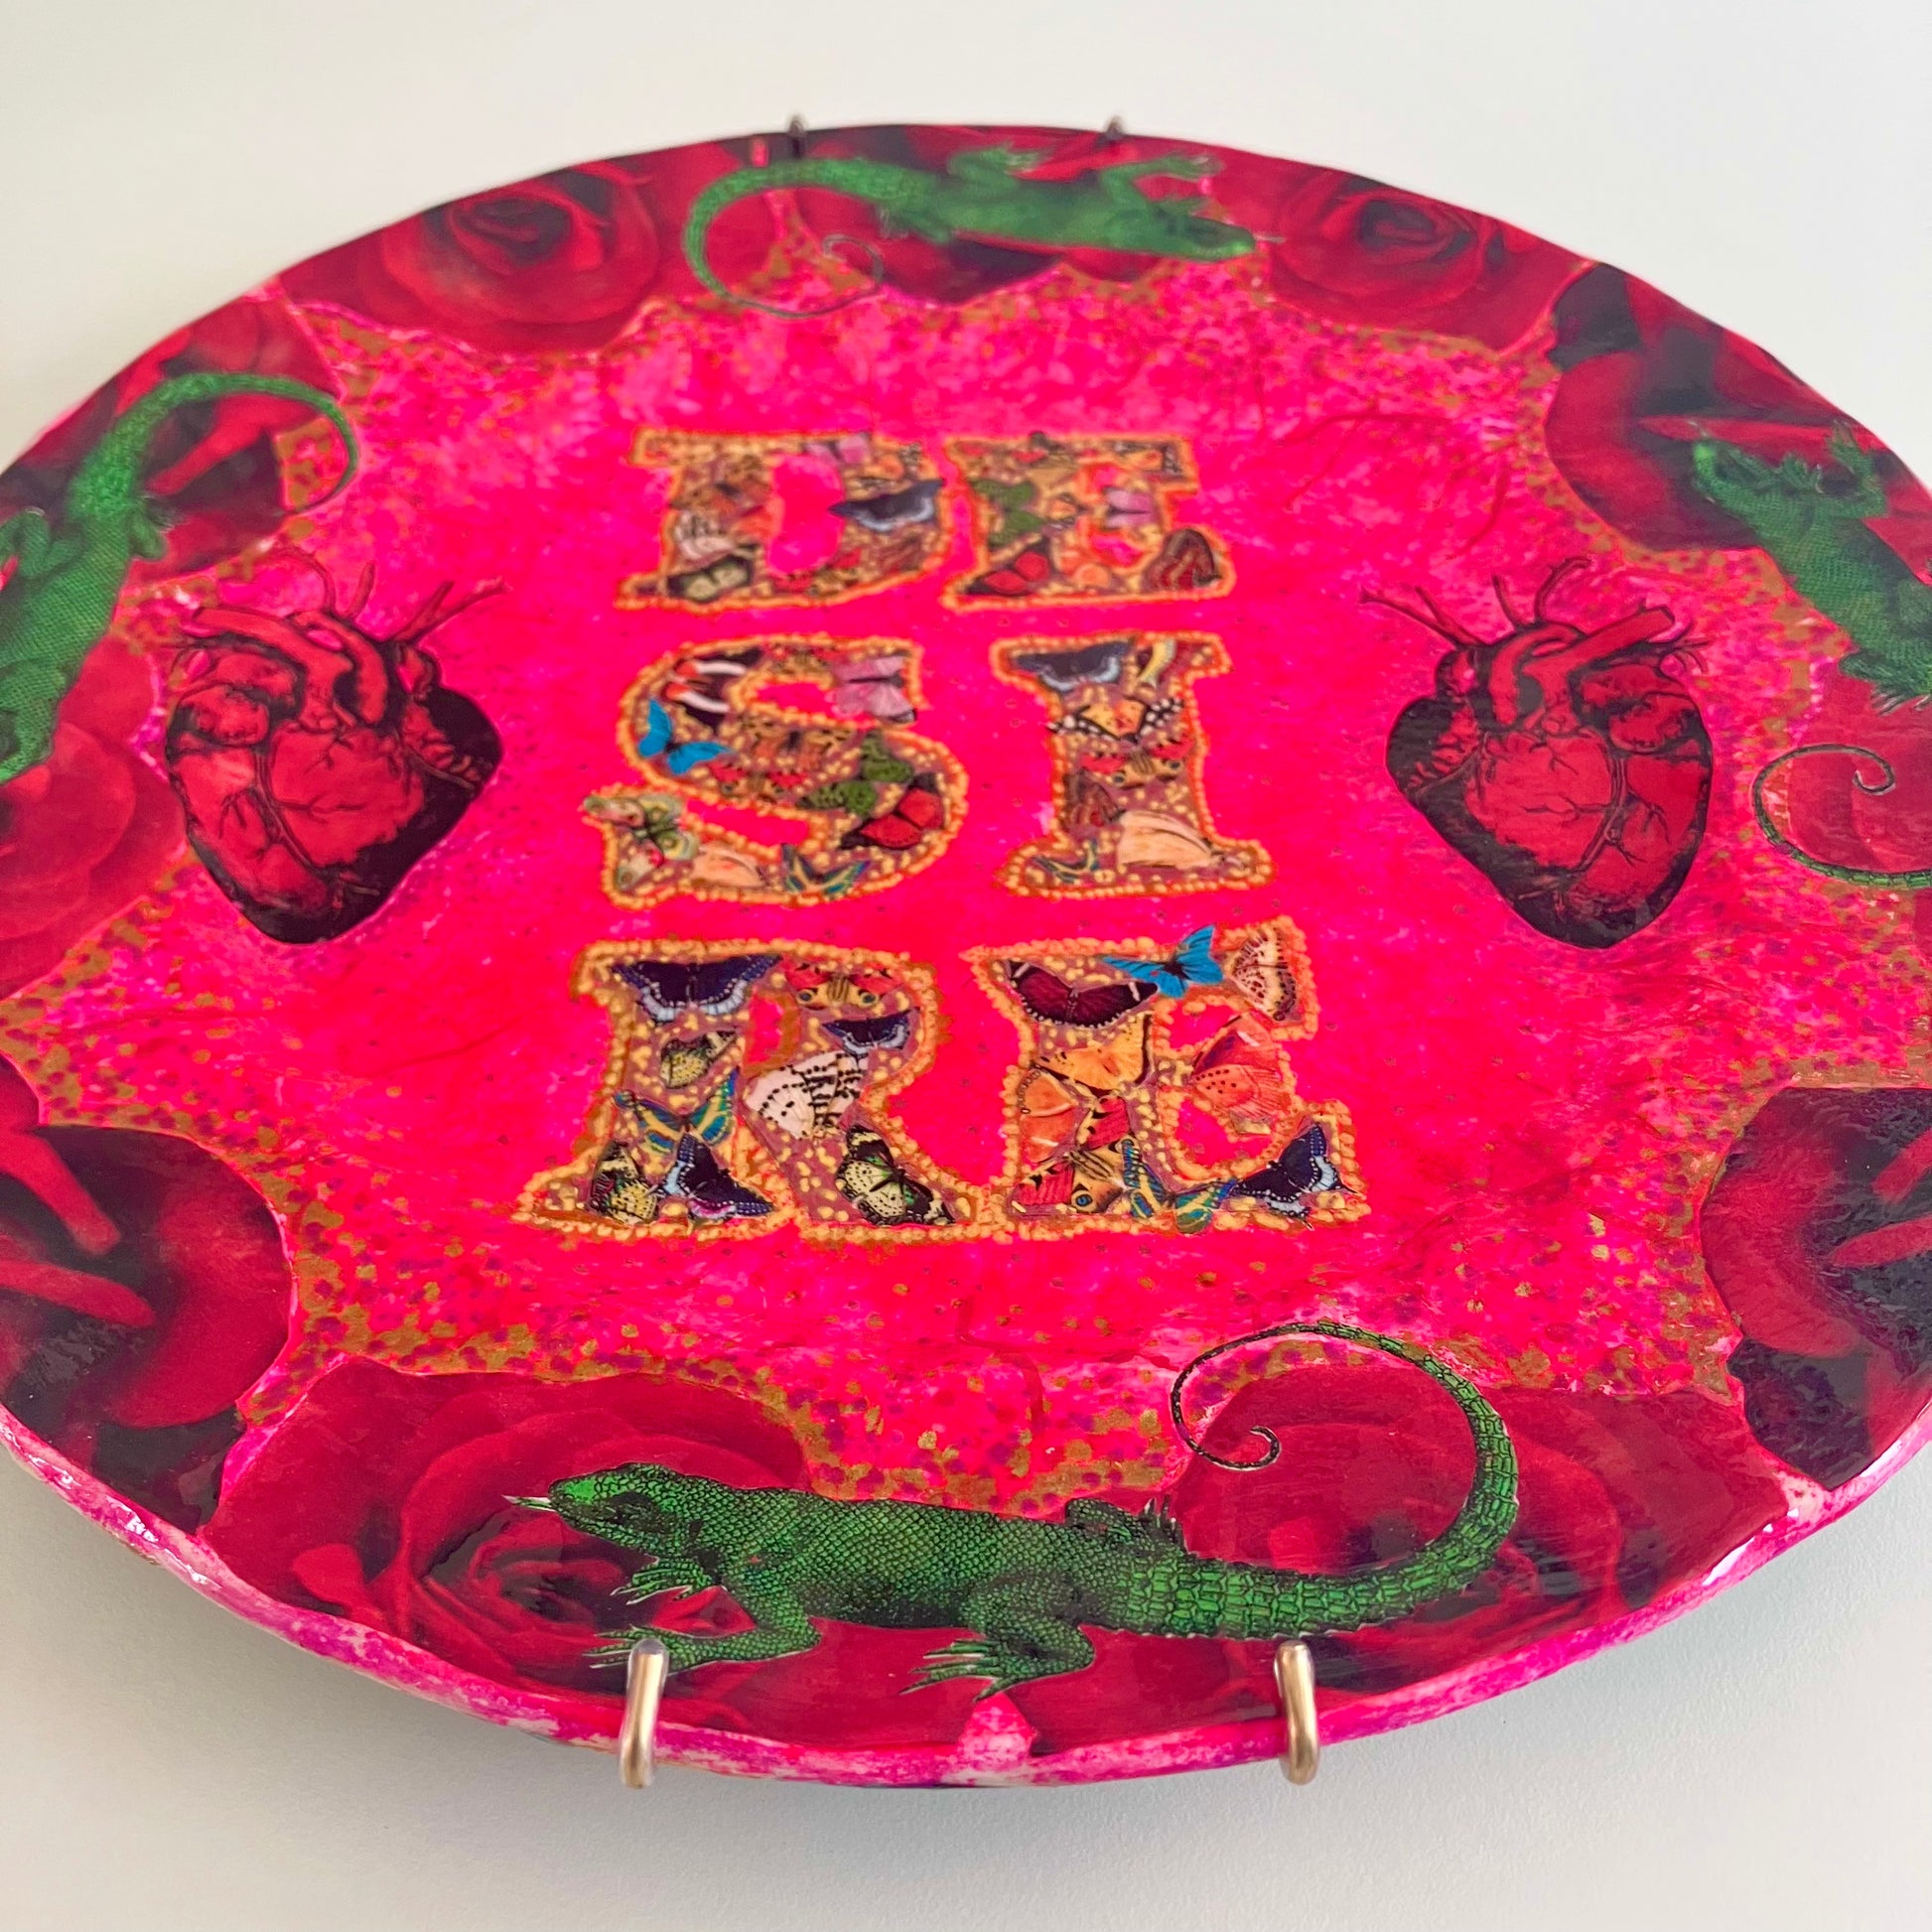 "Desire" Wall Plate by House of Frisson, featuring a collage with the word "desire" written with moths, and a frame of red roses and green lizards, on a hot pink background. Closeup details.